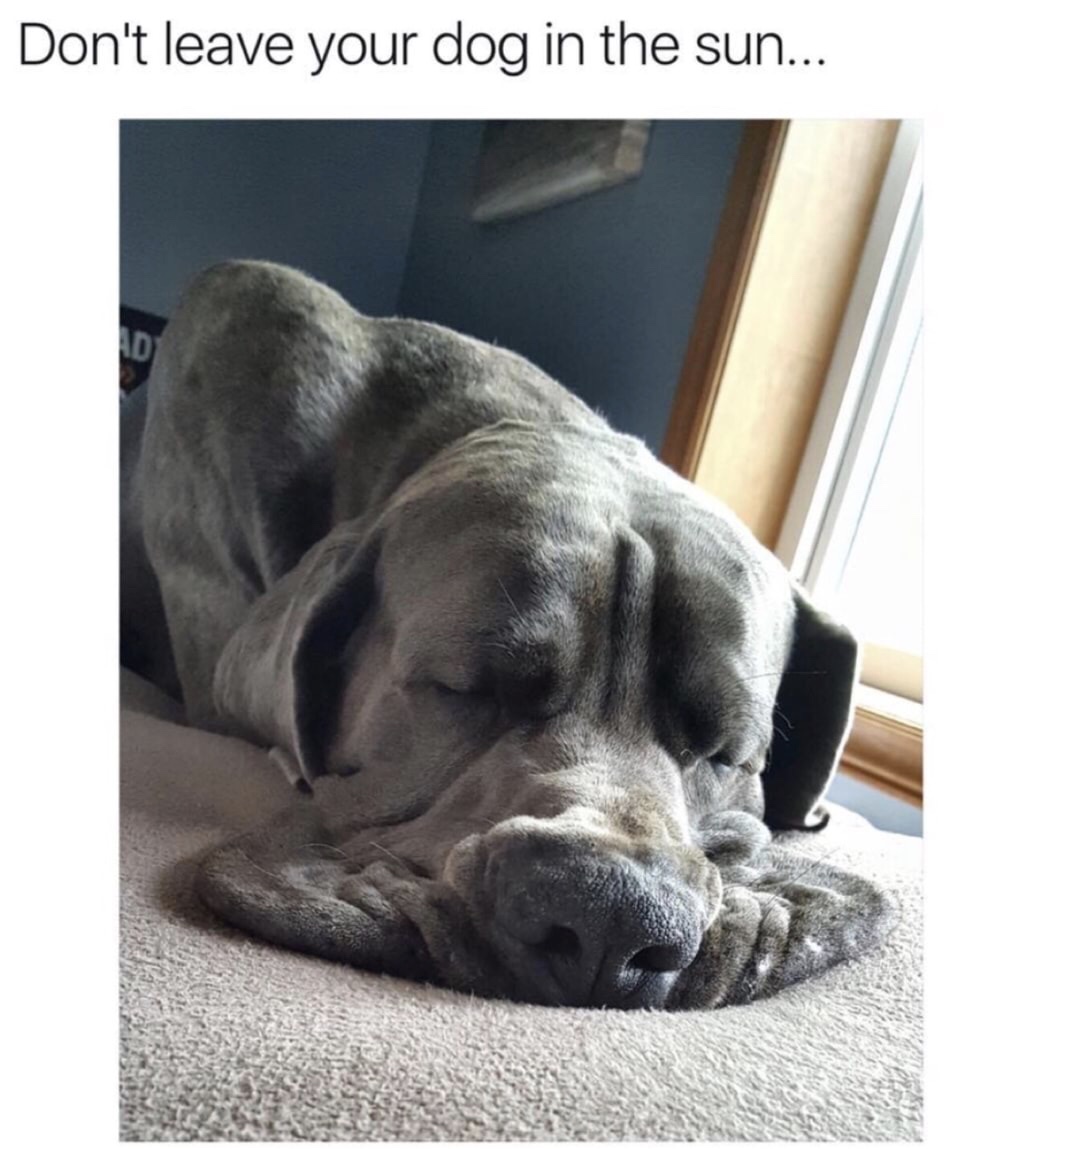 melting dog - Don't leave your dog in the sun...